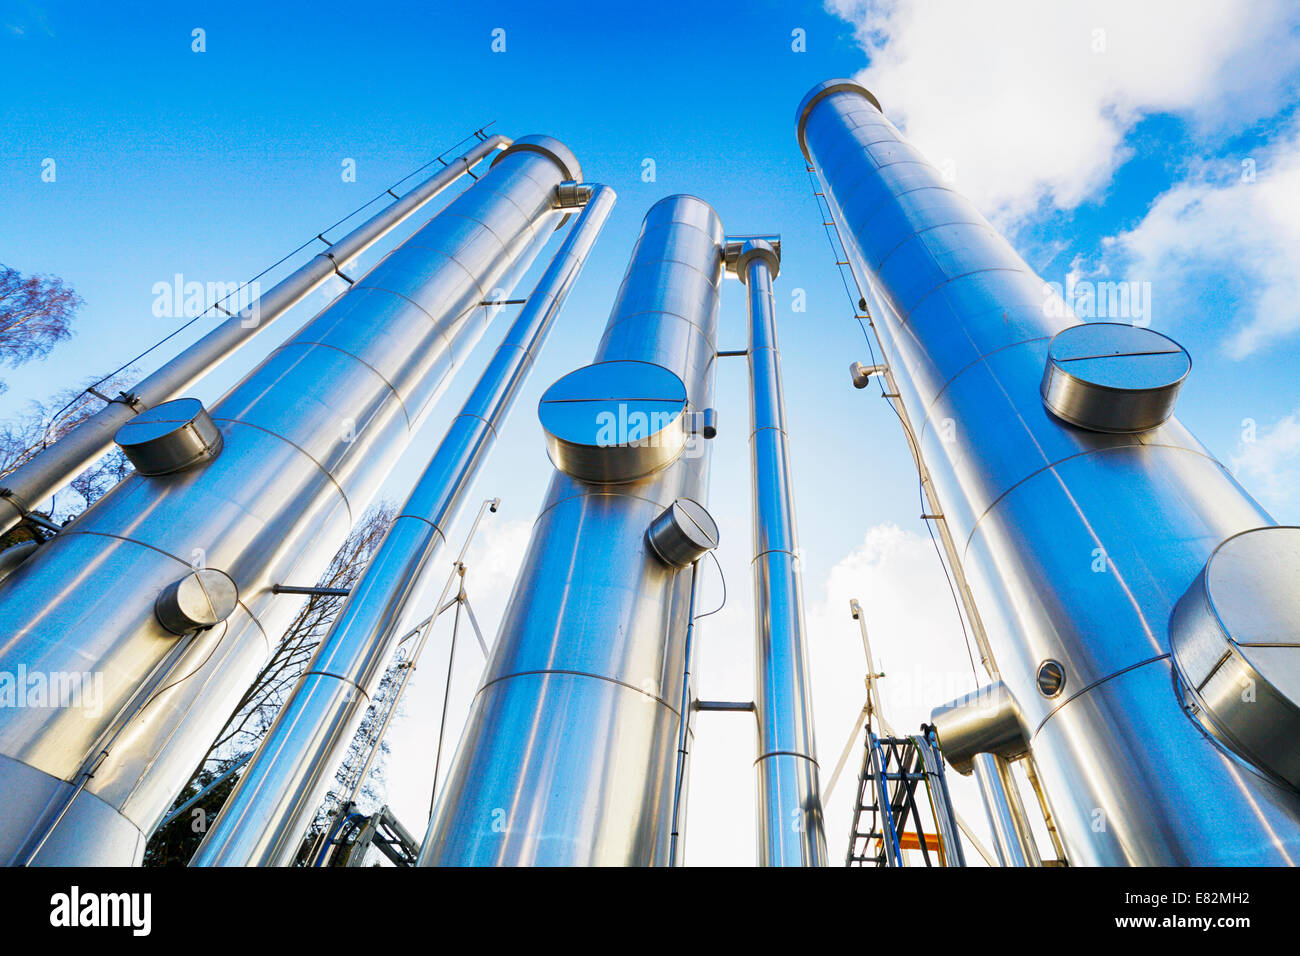 gas pipes, pipelines inside chemical refinery Stock Photo